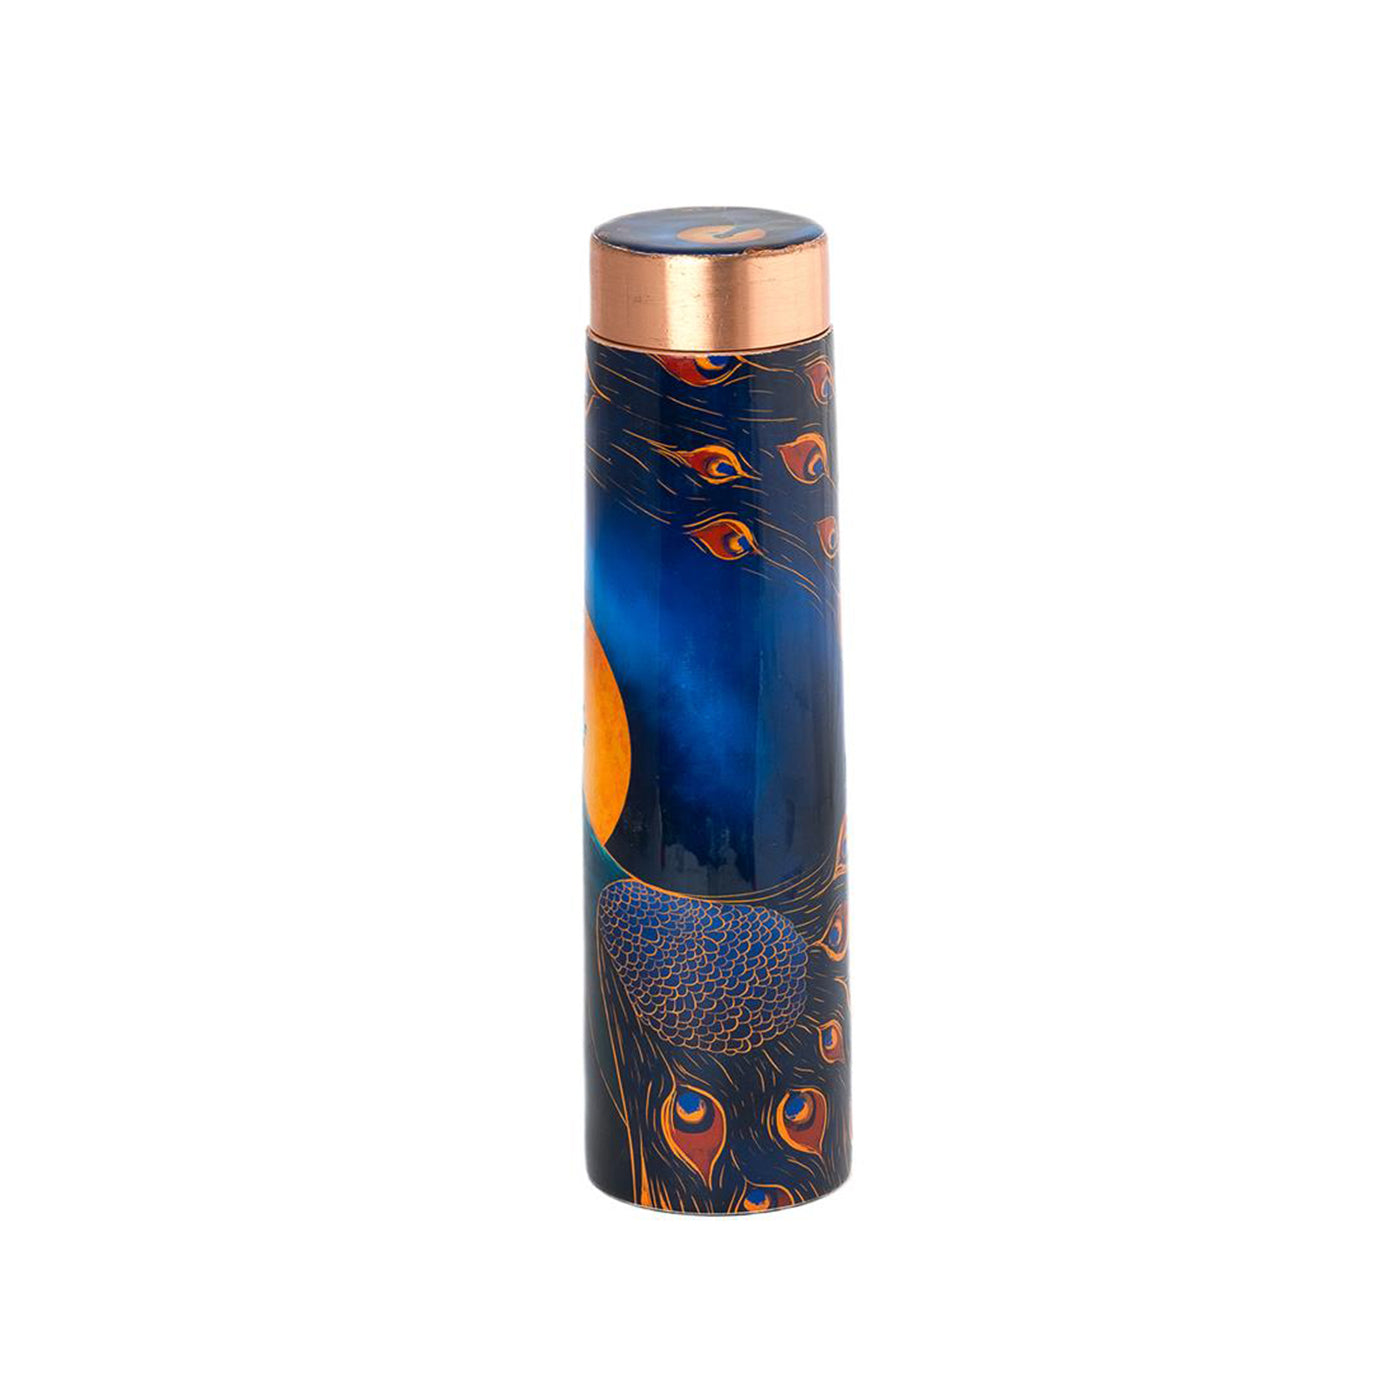 Copper Bottle Peacock Stylish Kitchenware Art for Home Decor and Storage